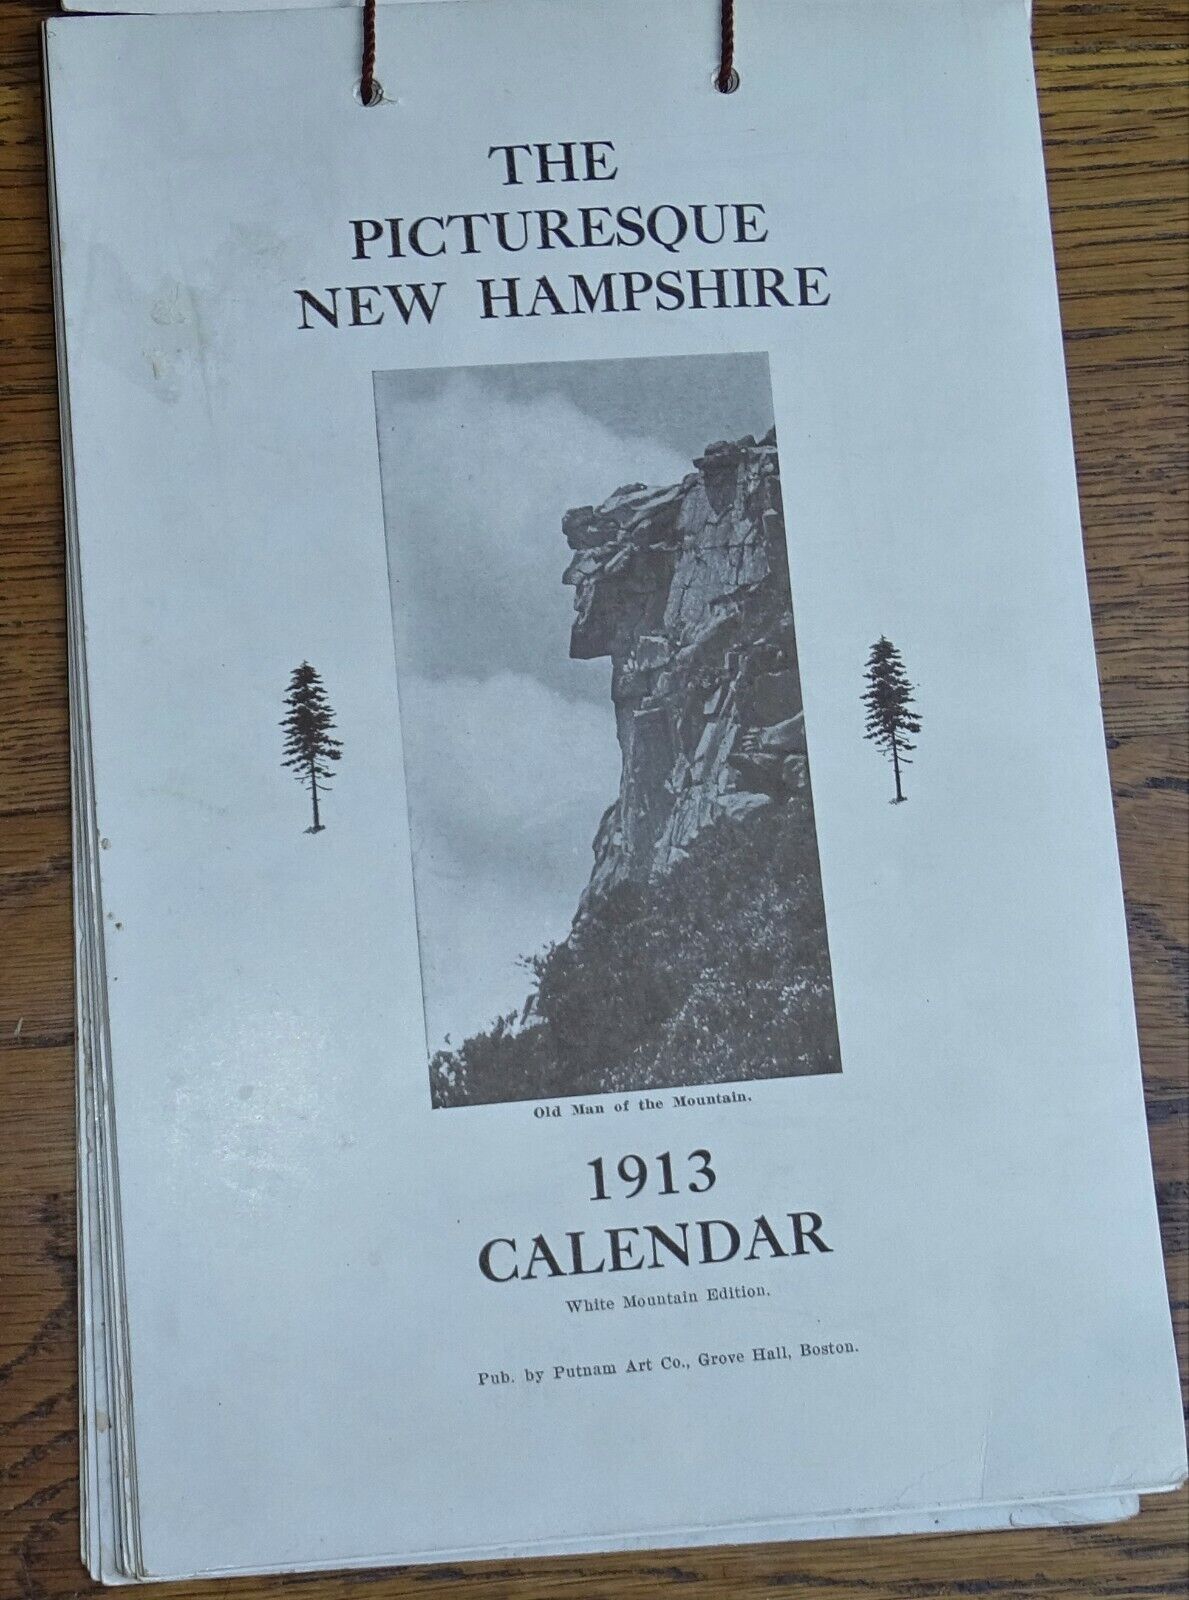 1913 Picturesque New Hampshire Calendar - White Mountains Edition